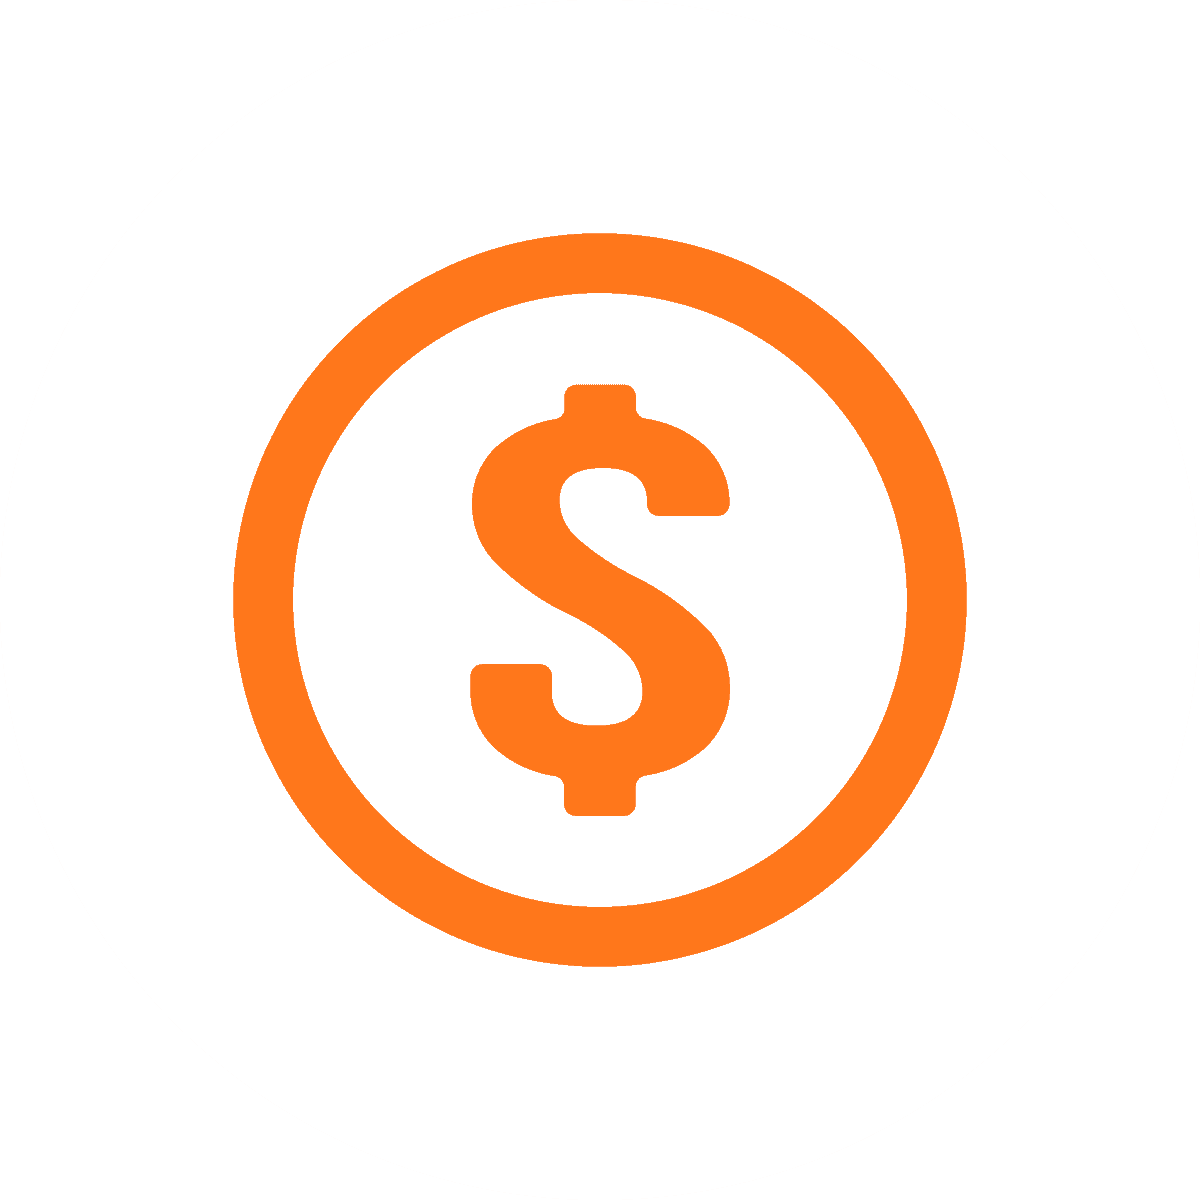 icon with dollar sign showing pricing